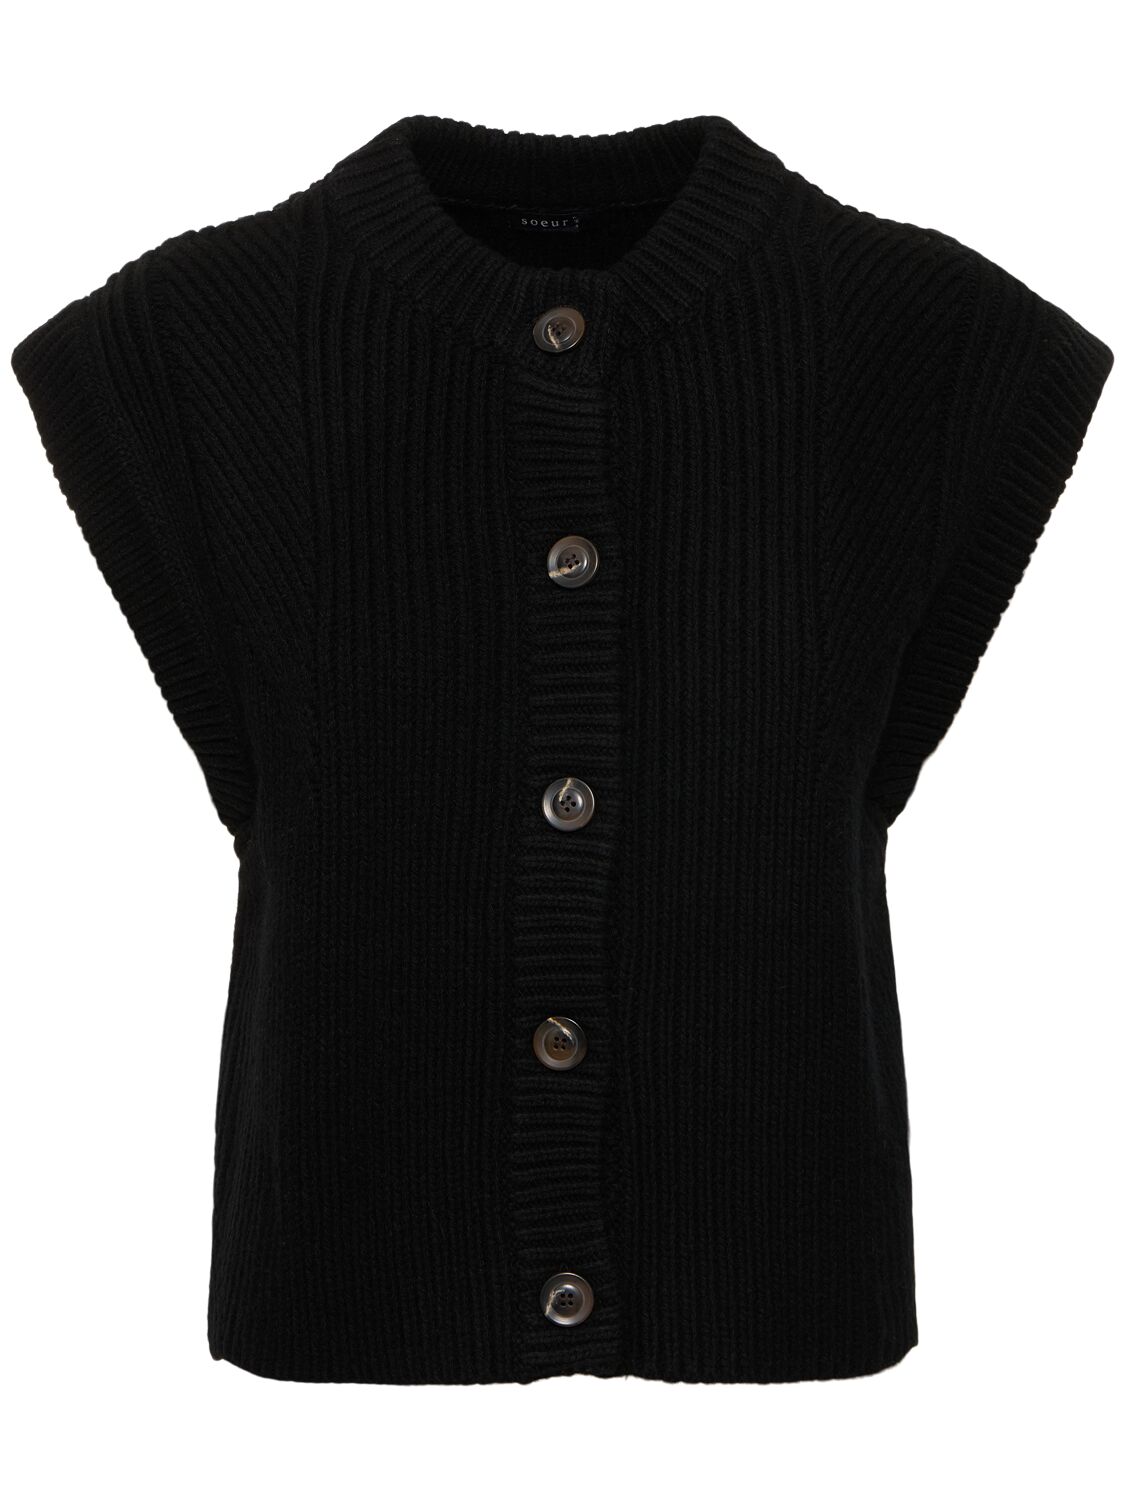 Image of Amore Buttoned Wool Vest